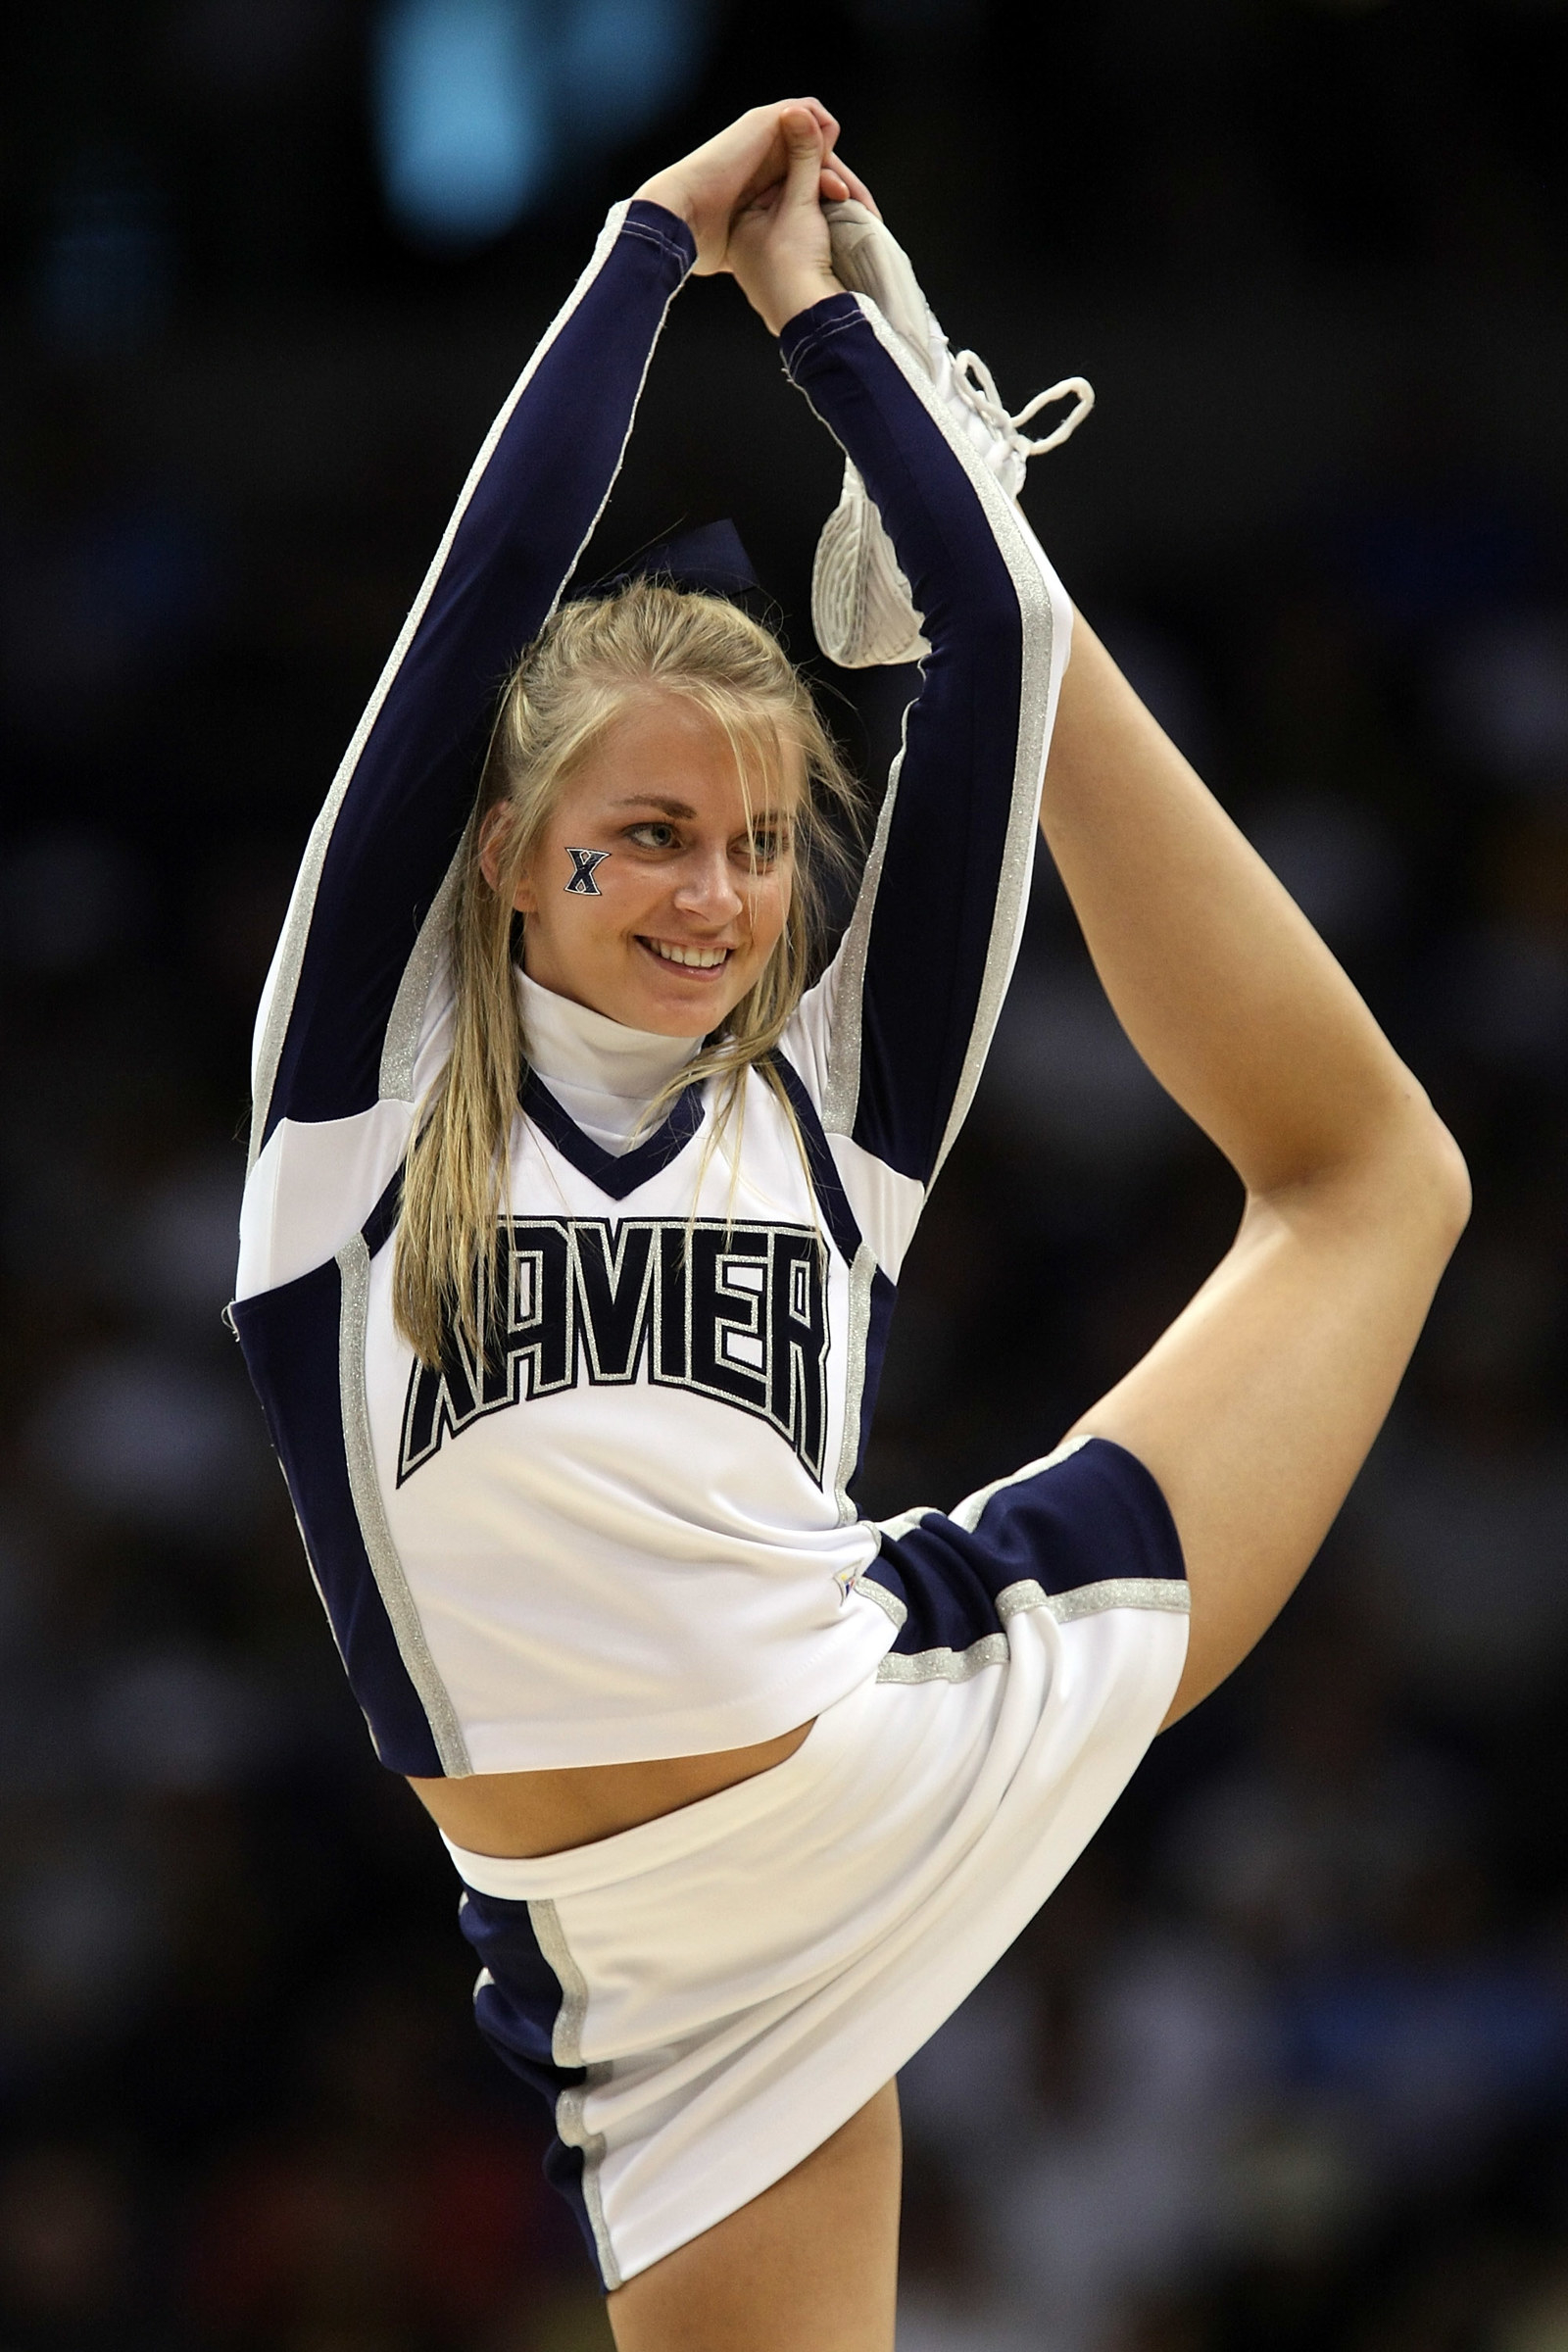 diane mackin recommends Real Cheerleader Pics